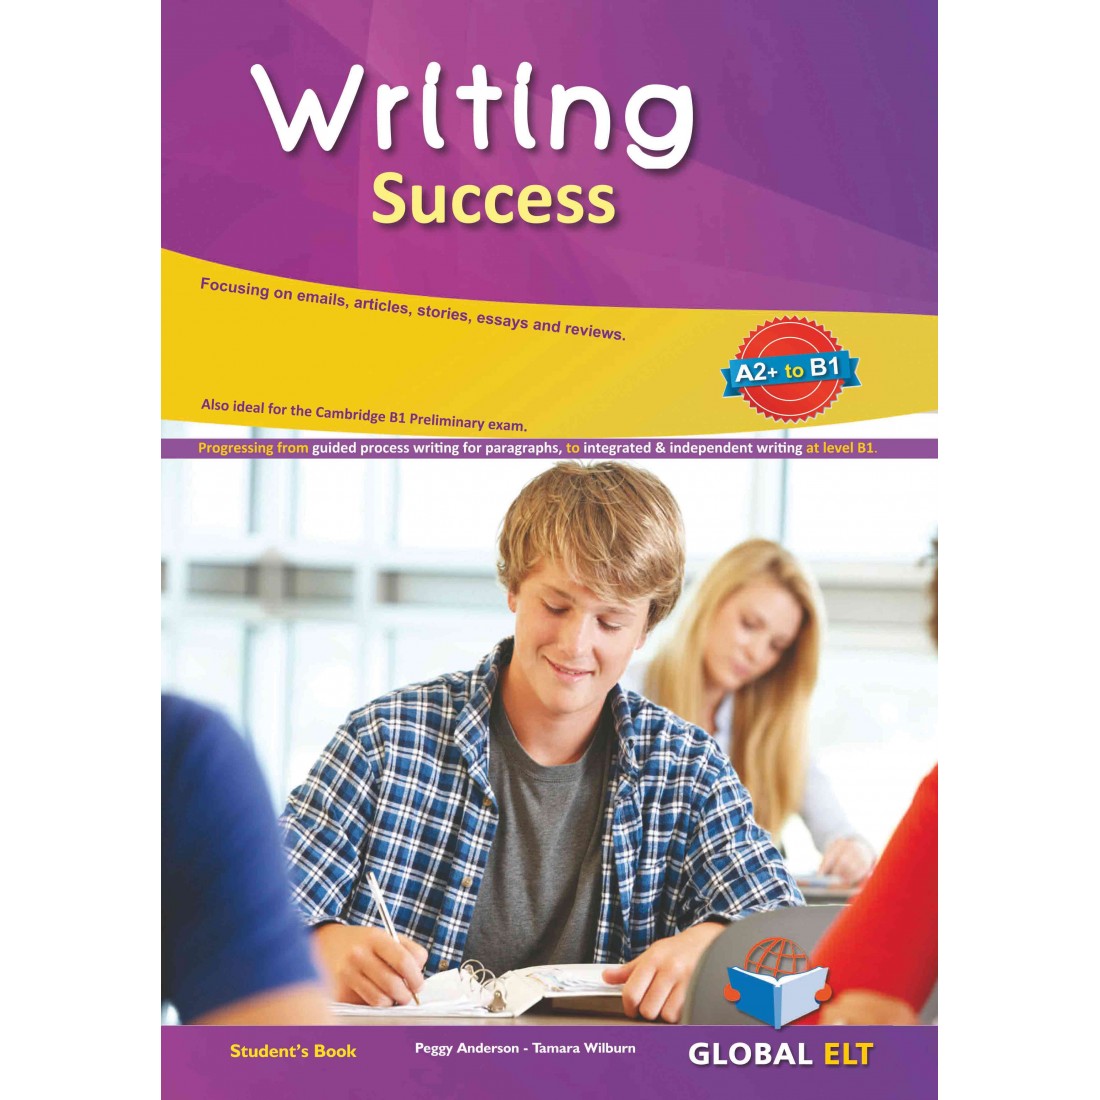 Student's book a2+. CPE Practice Tests 4. Think b1 student's book 2. B1 Business English student book. More student's book